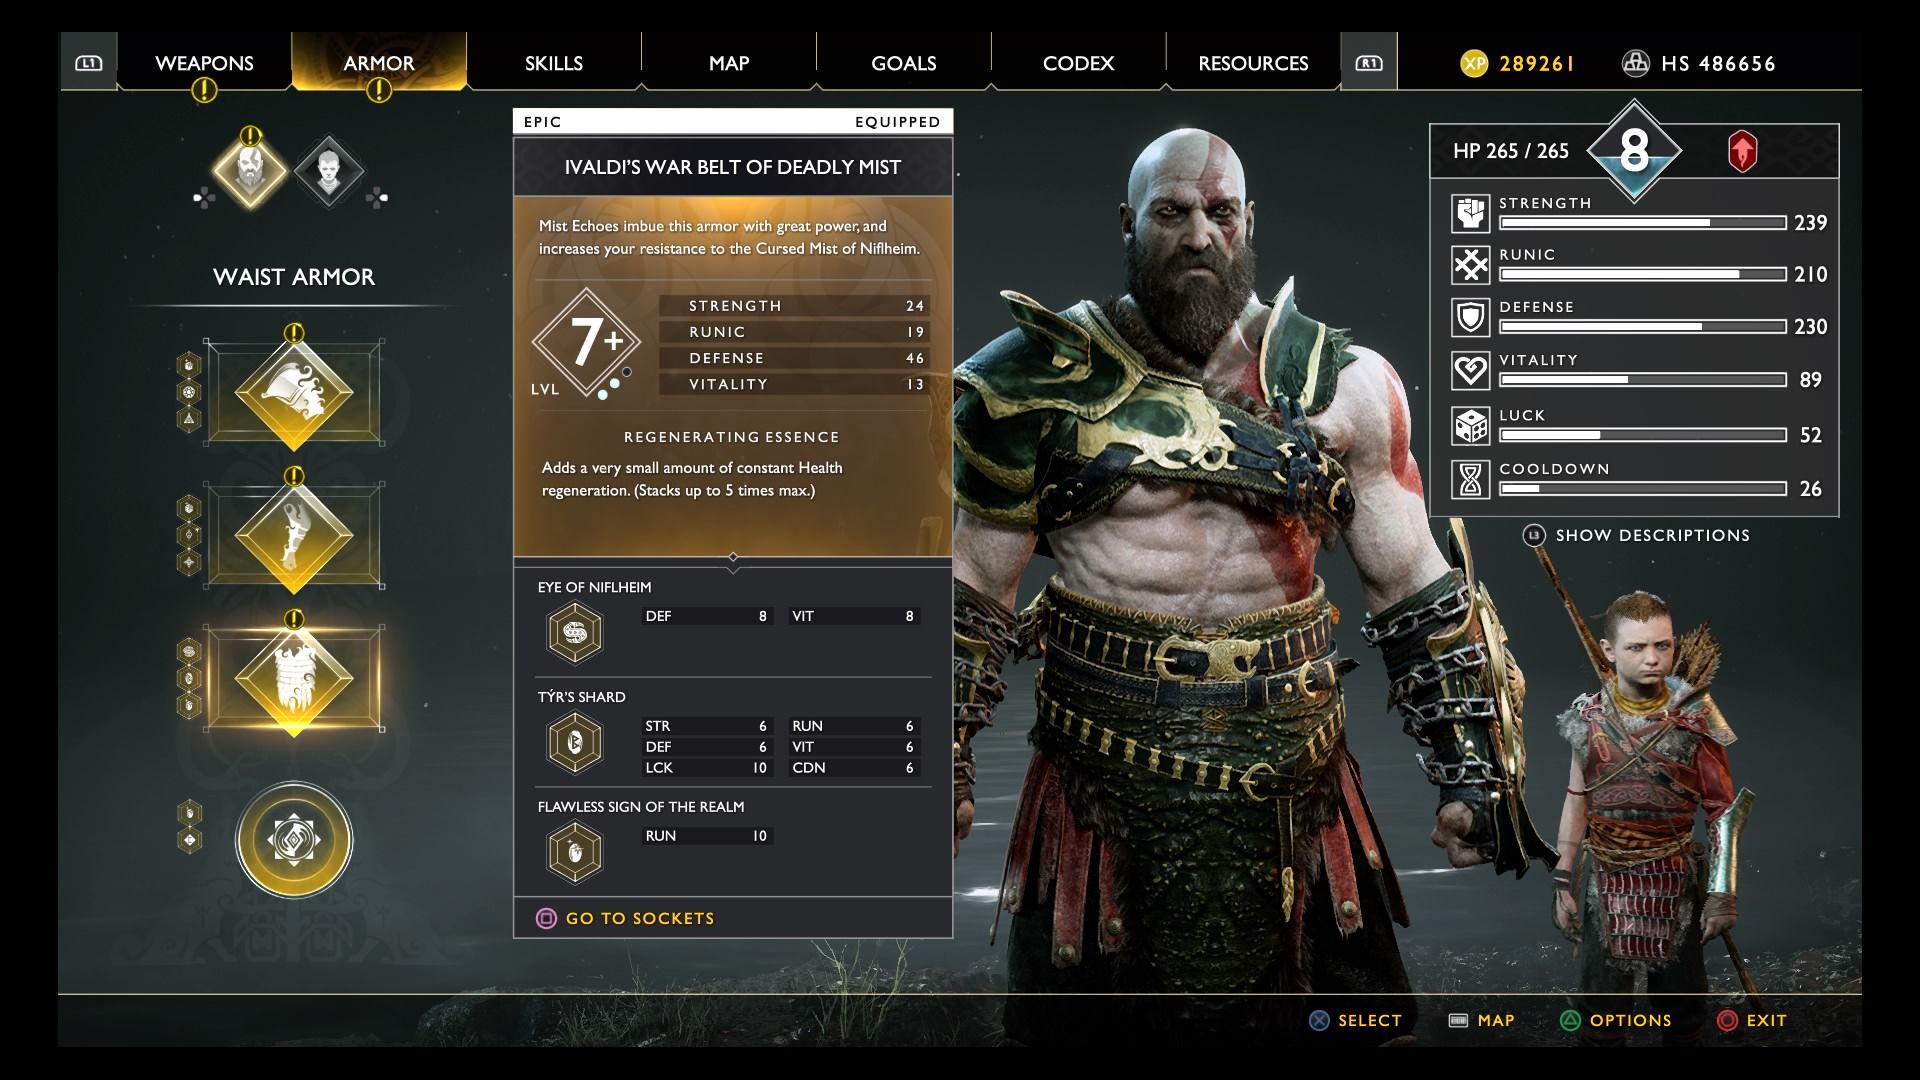 A screenshot showing Kratos' armor and the different relics he has equipped.